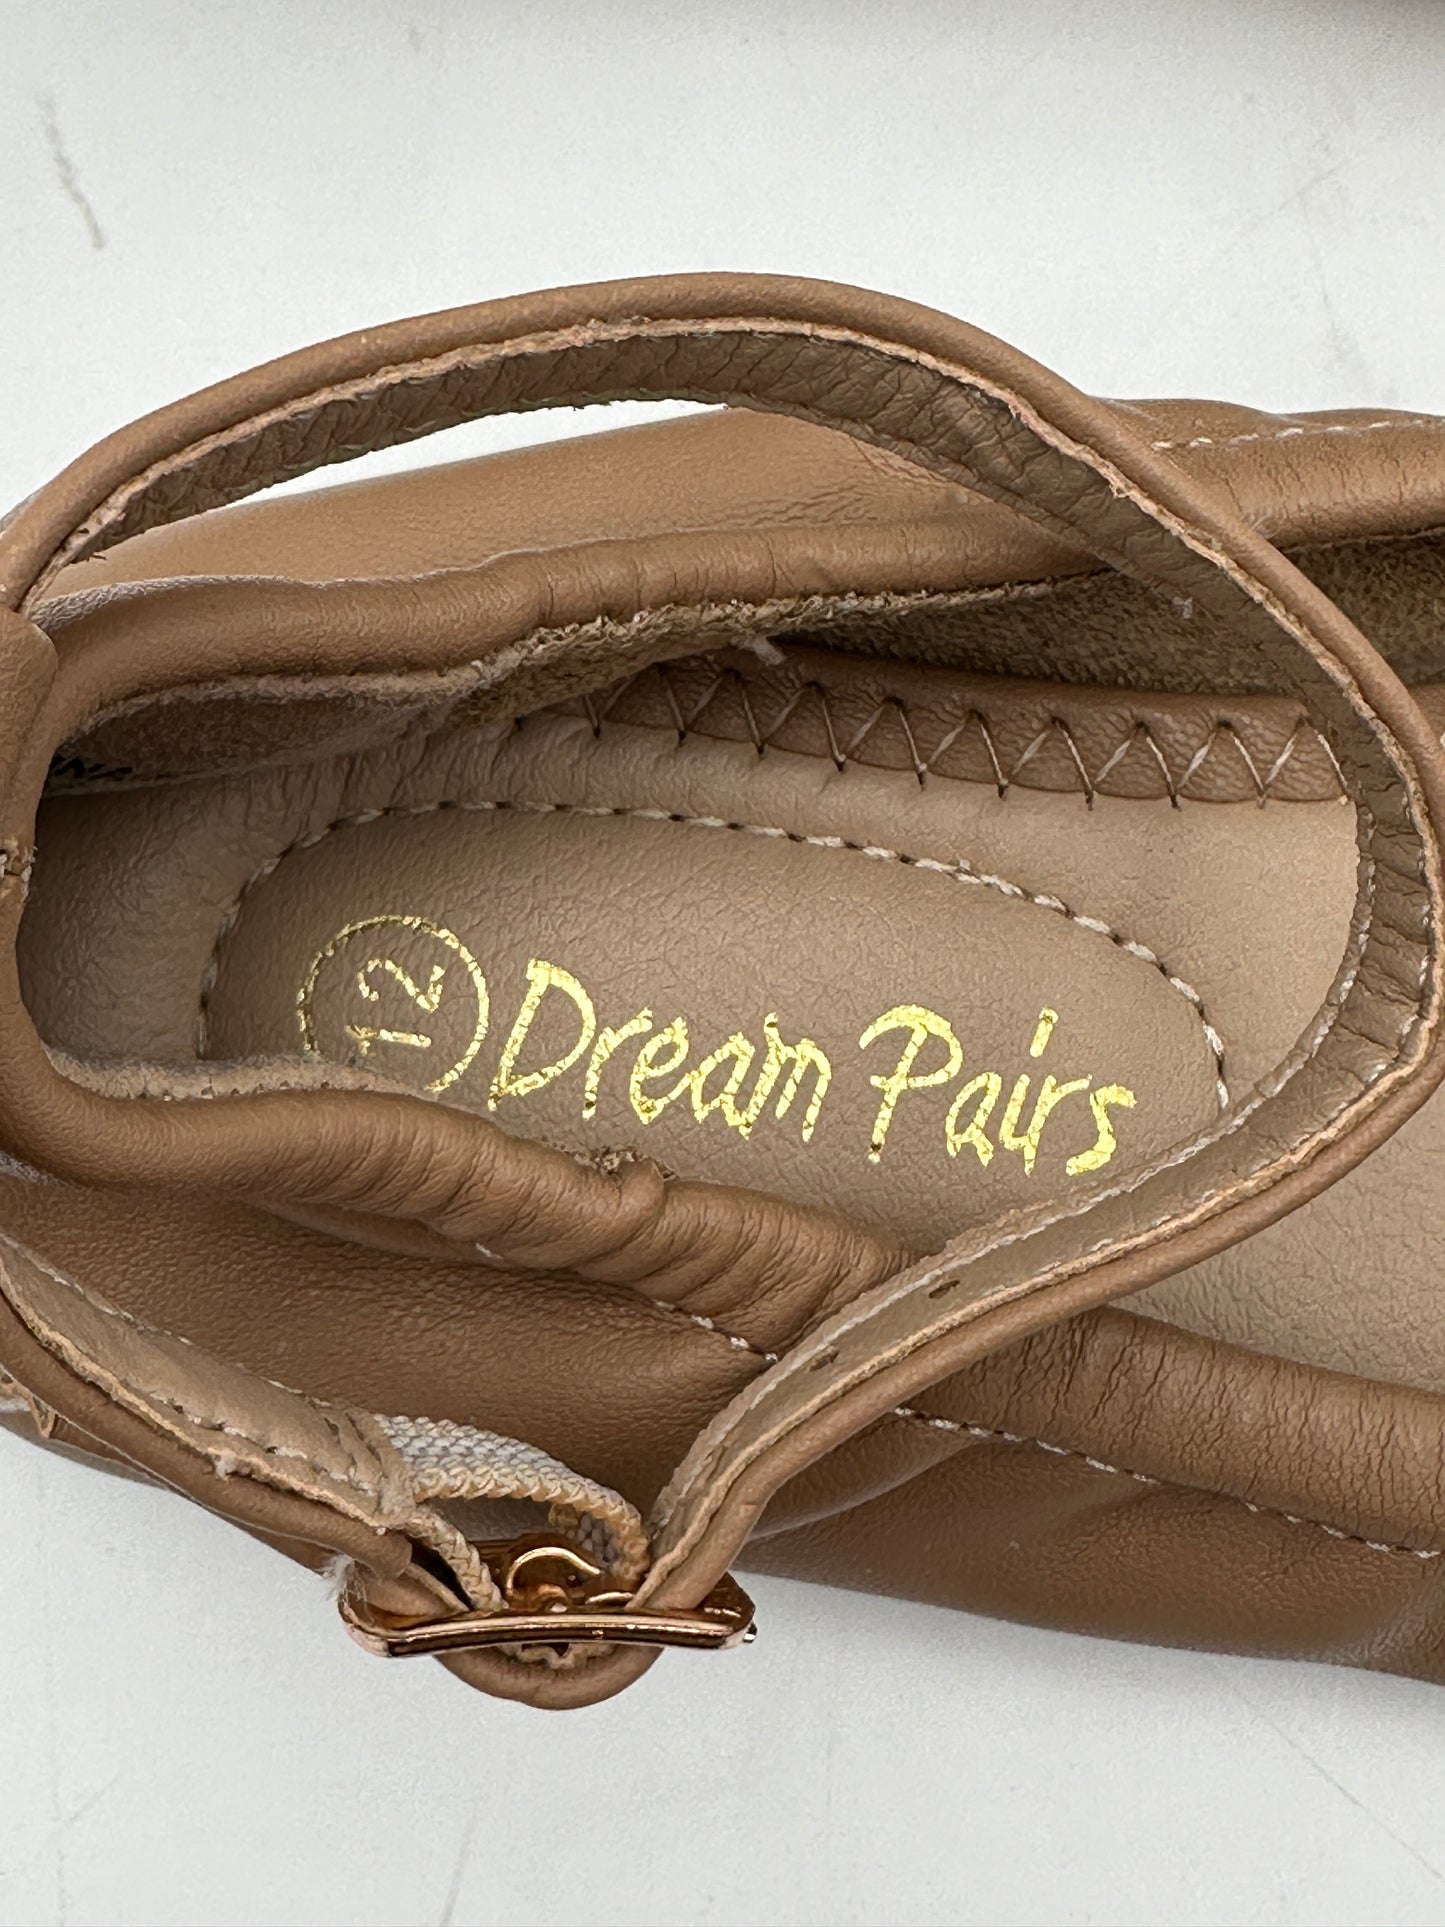 Dream Pairs Girls' Size 12 Tan Ankle Strap Ballet Shoes Dance Slippers Dress Shoes